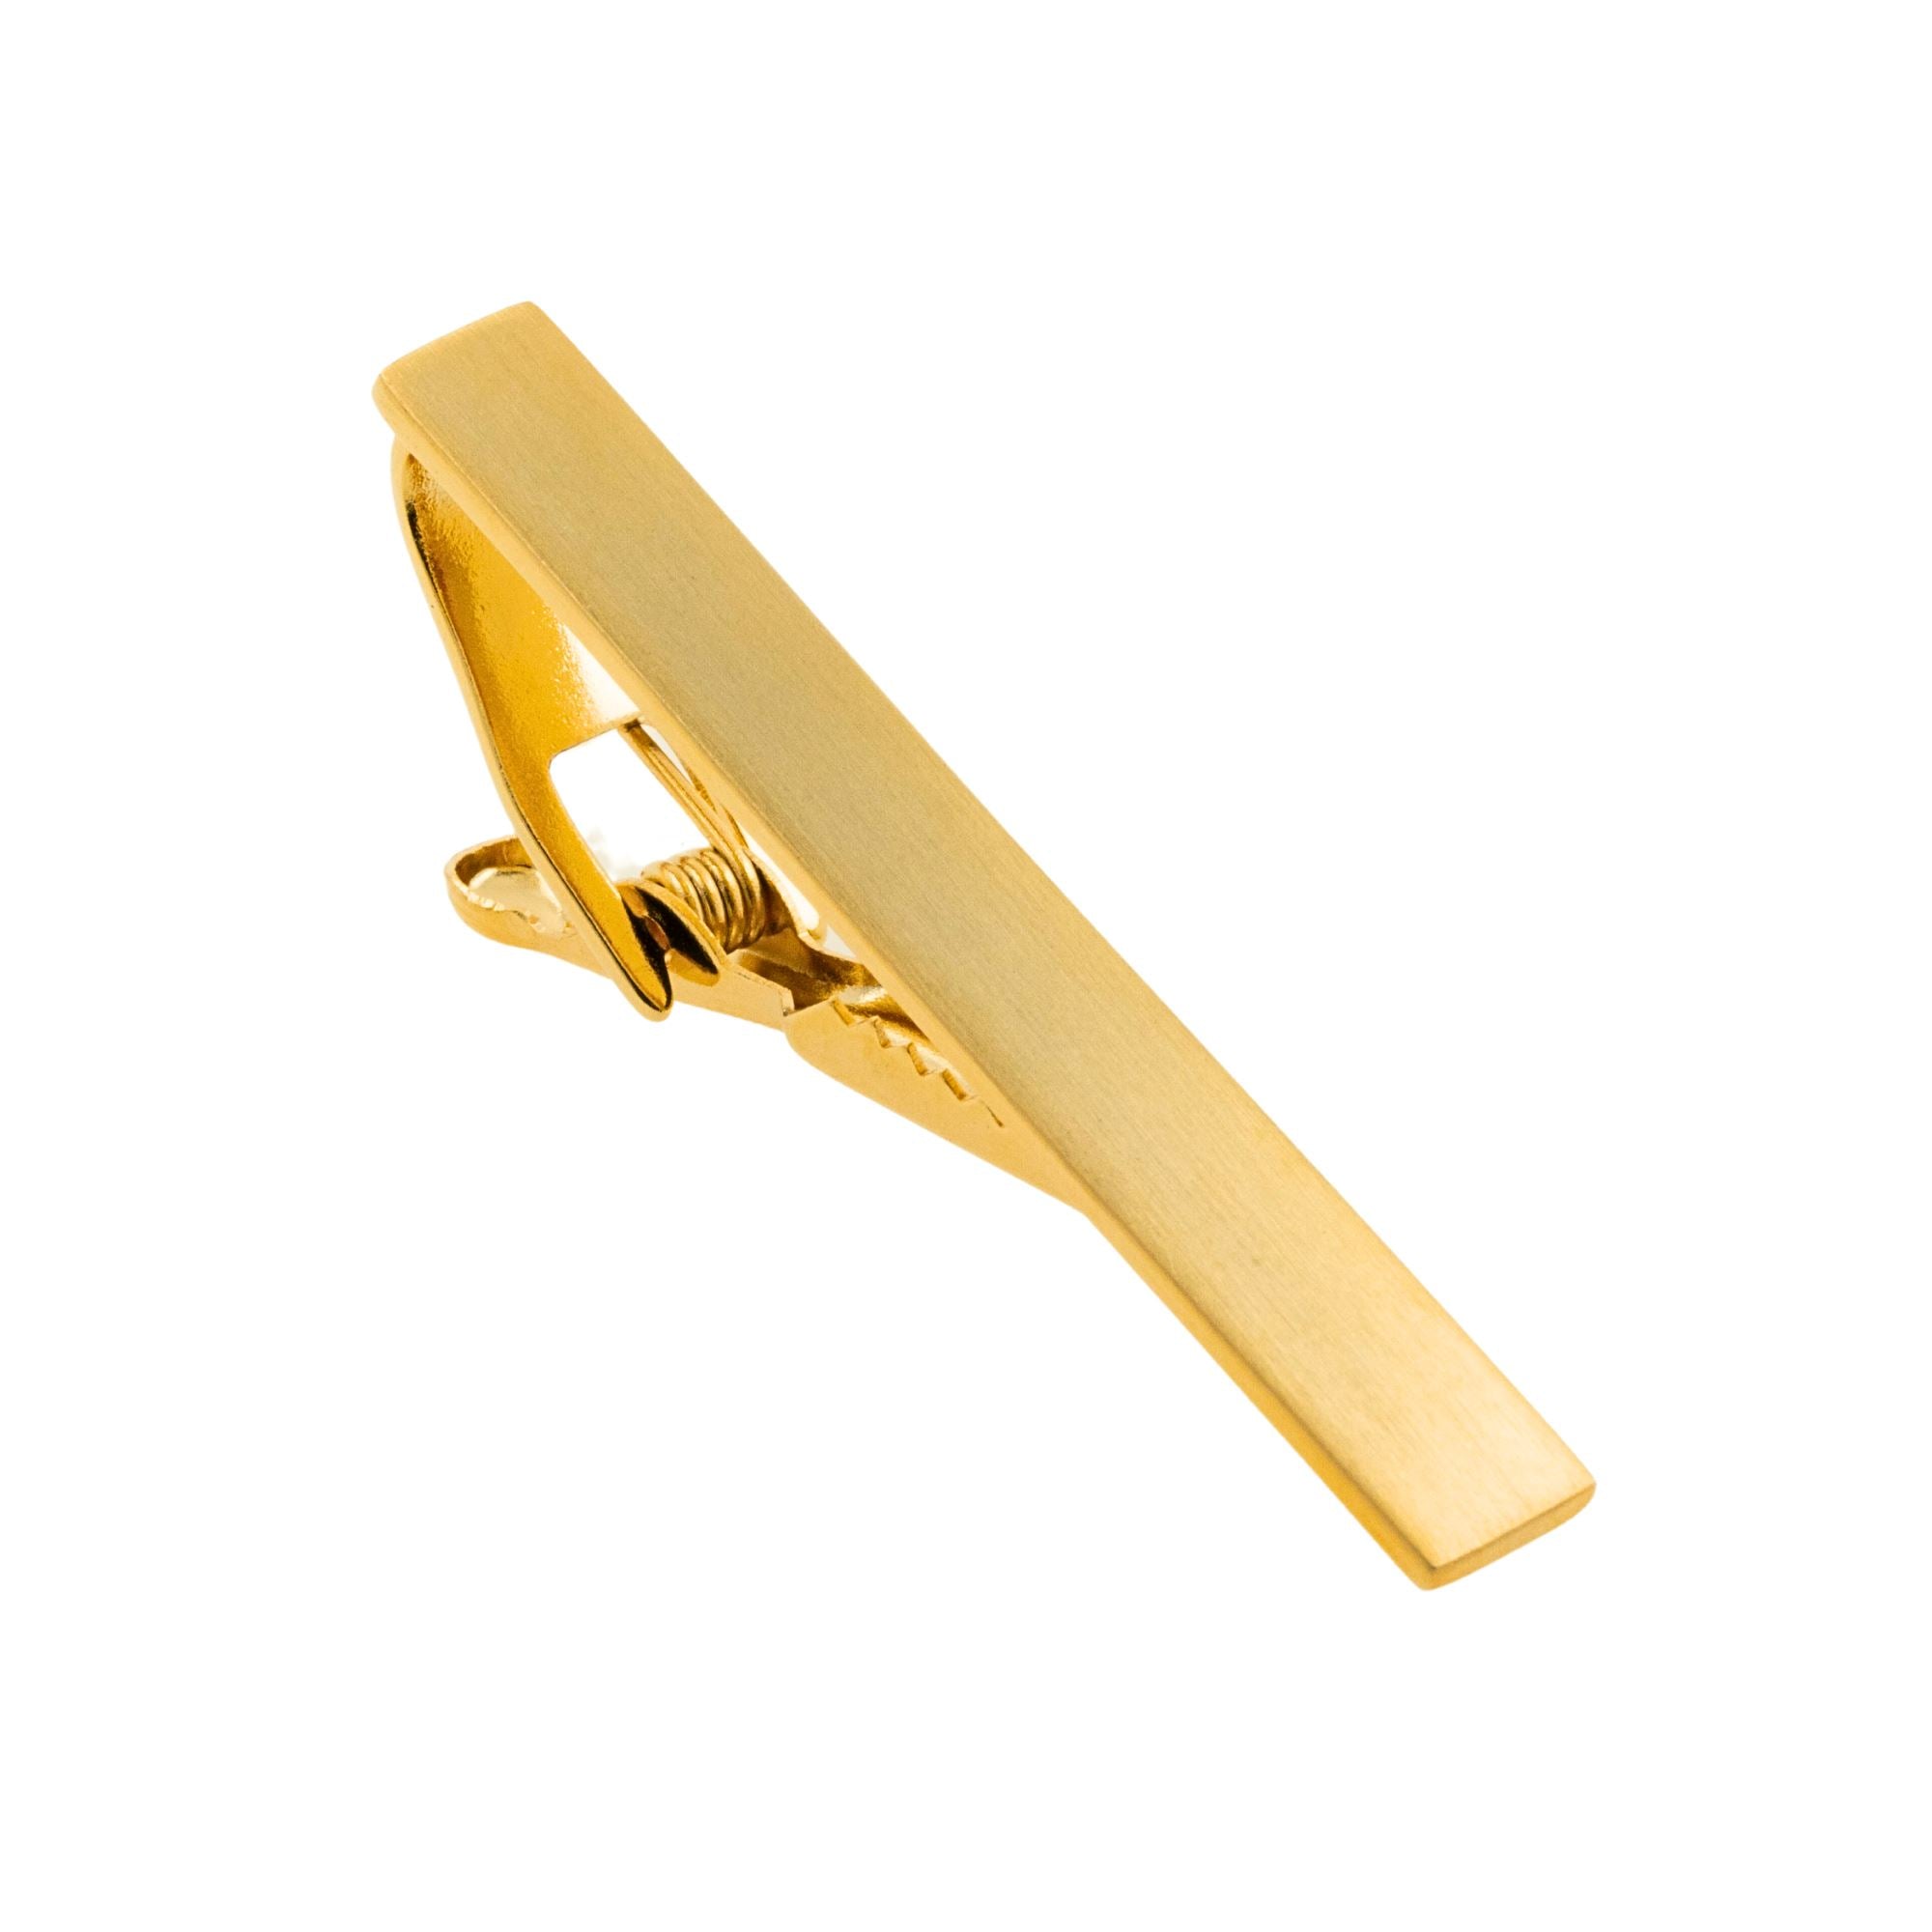 Brushed Gold Tie Clip 50mm Tie Clips Clinks Australia 